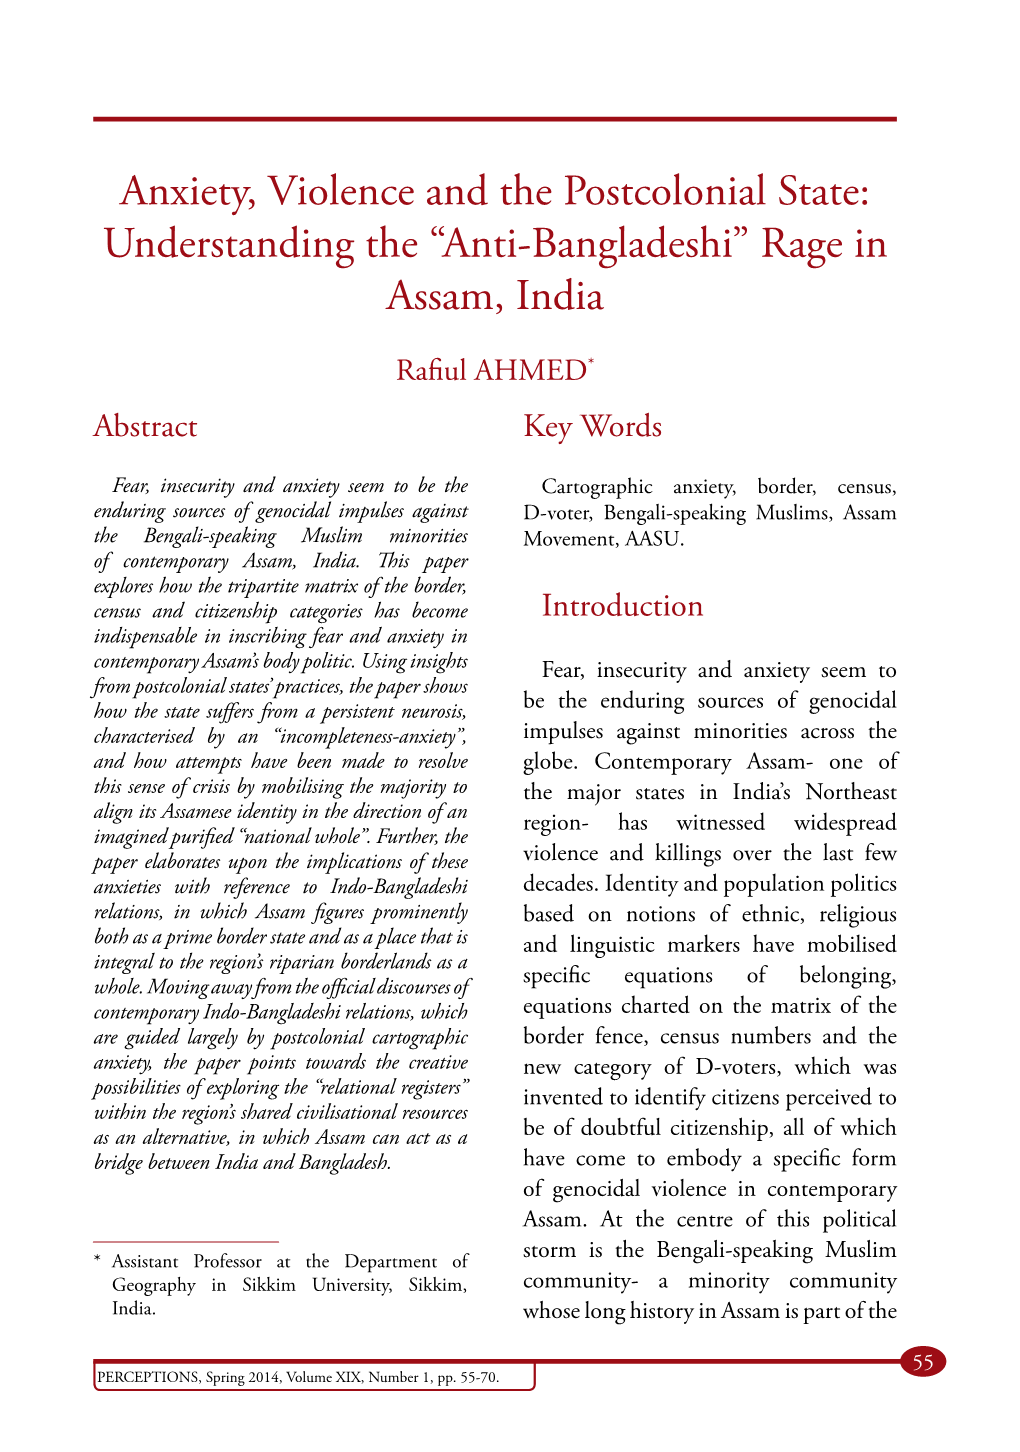 Anxiety, Violence and the Postcolonial State: Understanding the “Anti-Bangladeshi” Rage in Assam, India